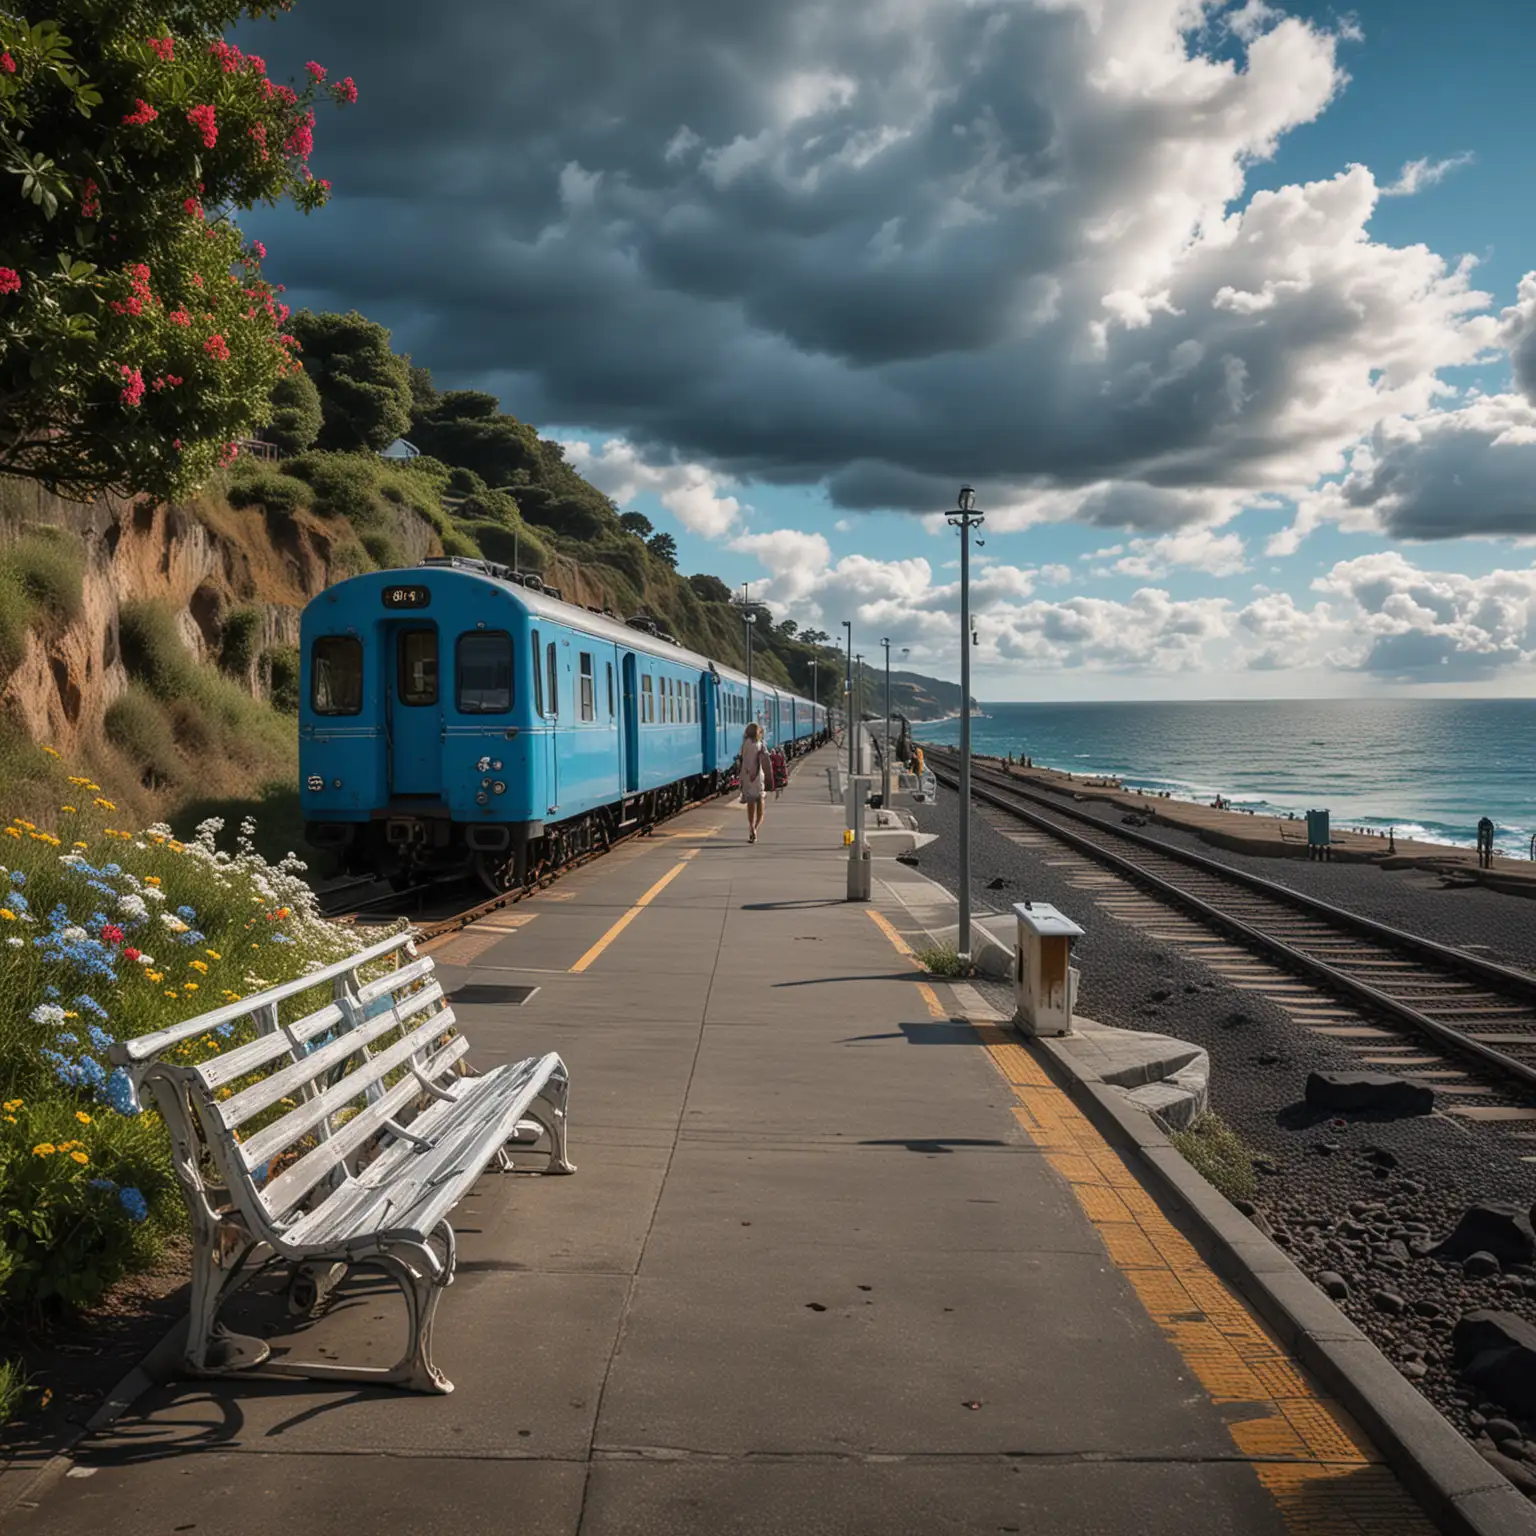 A photo of a lone woman sits on a bench at a small train station, waiting for a train to arrive. The station is located on a cliff overlooking a blue ocean. The train is a bright blue and white color, with a single car. The station is a simple structure with a roof and a few benches. The sky is a clear blue with a few white clouds. The scene is peaceful and tranquil, with a sense of anticipation for the arrival of the train. The woman's solitary figure adds a touch of loneliness to the scene, but also a sense of quiet contemplation. The view of the ocean adds a sense of vastness and serenity to the scene.  The image evokes a sense of peace and quiet.  The simple beauty of the scene is enhanced by the vibrant colors of the train and the blue of the ocean.  The flowers lining the path leading up to the station add a touch of color and whimsy. Photo-realistic, intricate, elaborate, award-winning photo, travel photography, 8K, UHD, HDR. 